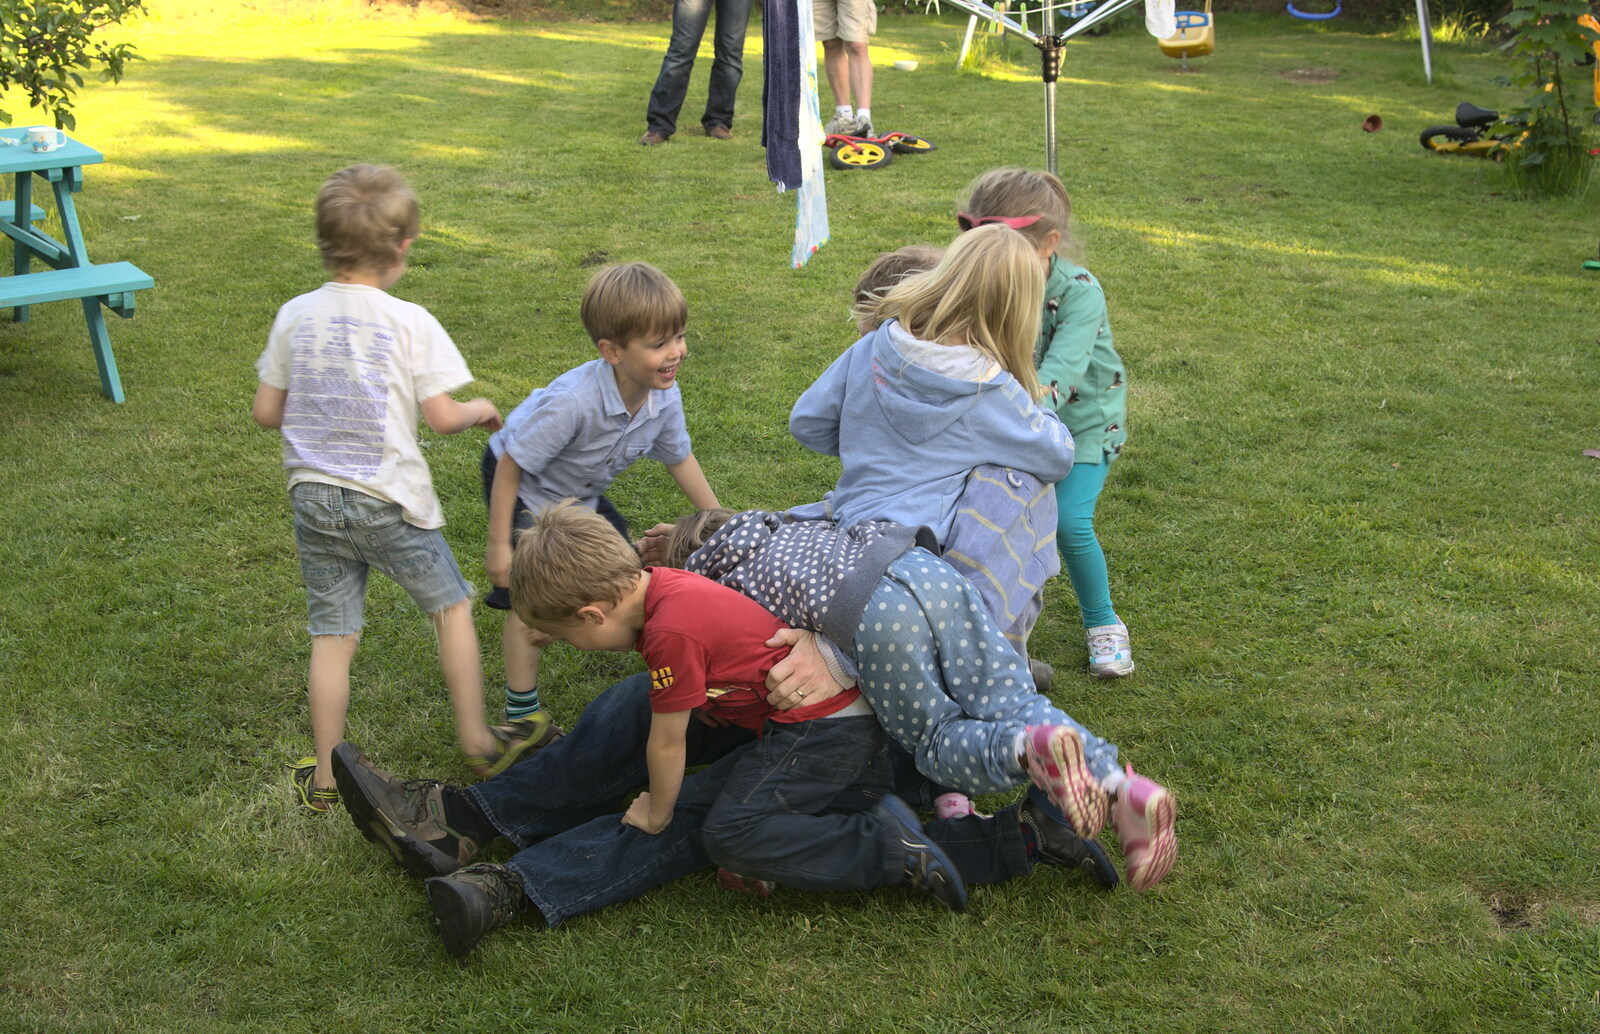 The children all pile onto Mikey P from A "Not a Birthday Party" Barbeque, Brome, Suffolk - 25th May 2014